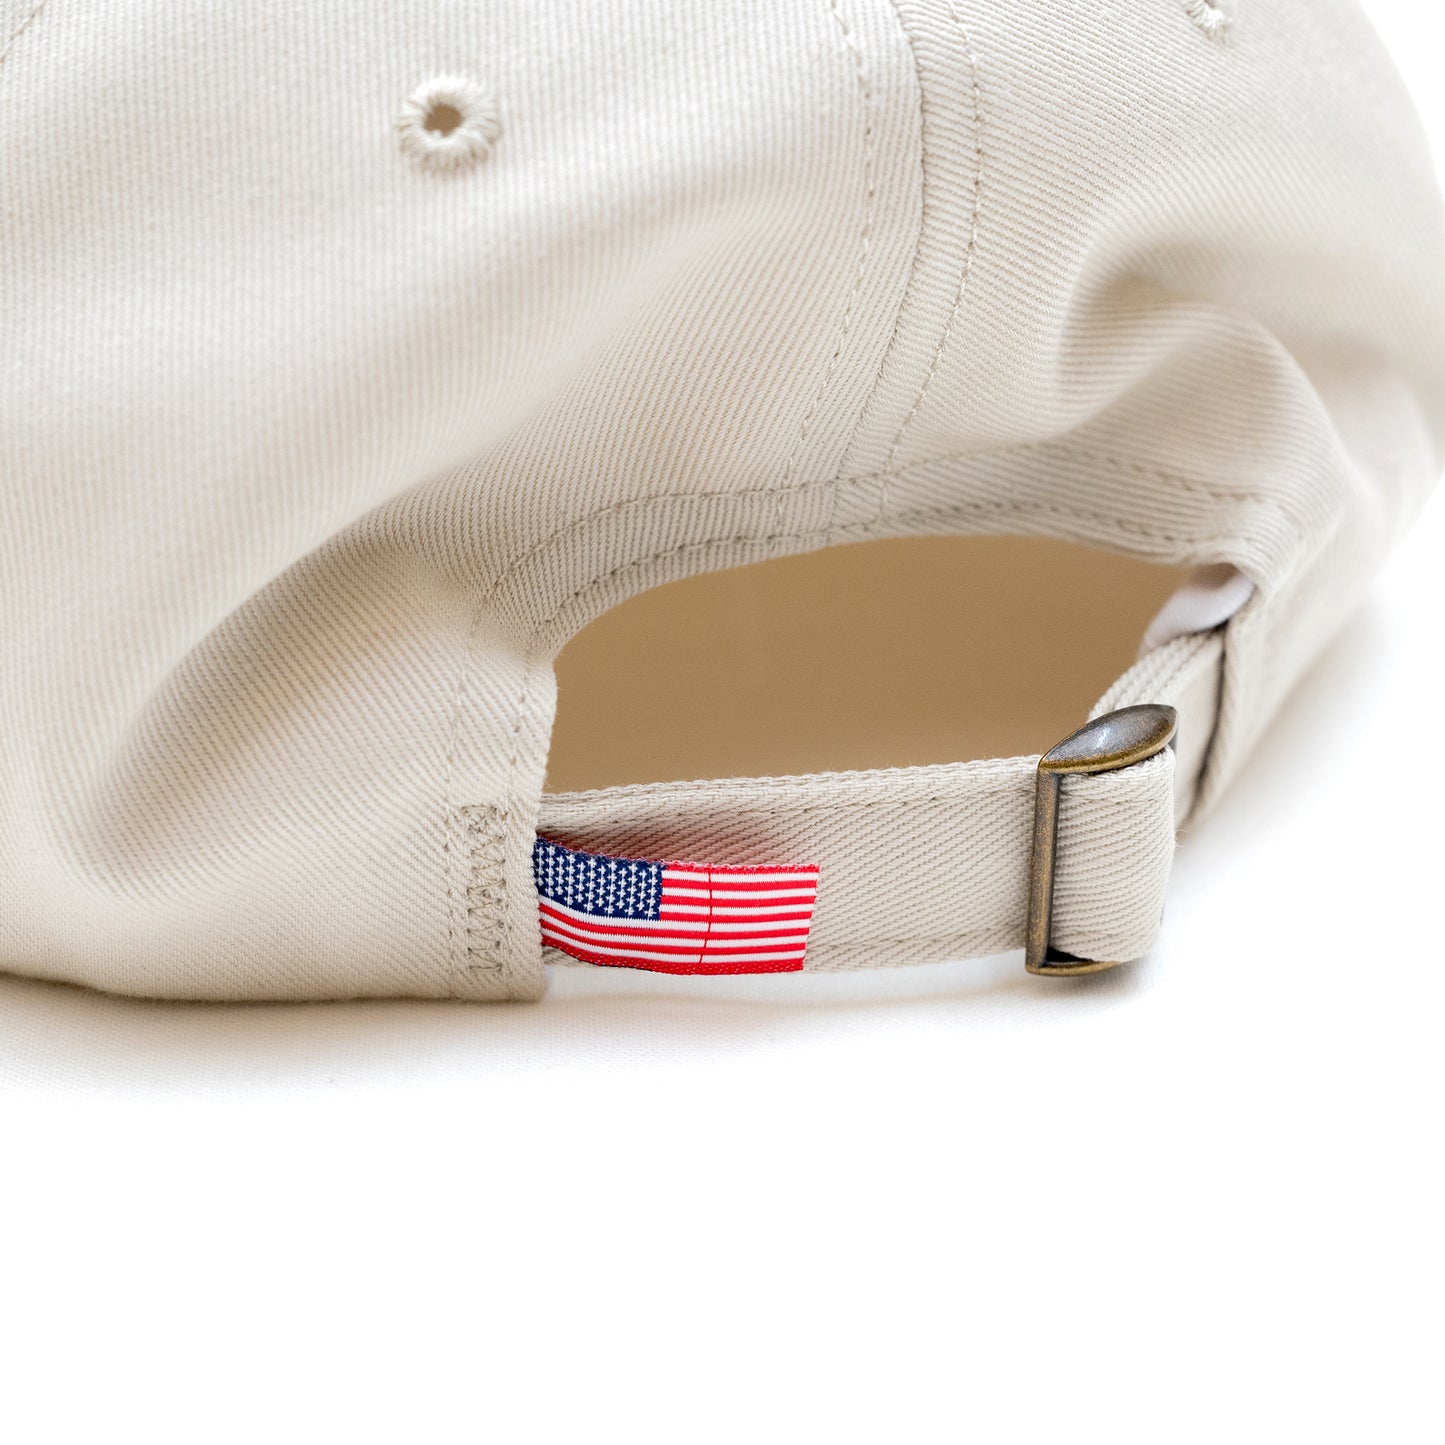 COOPERS TOWN BALLCAP SOLID WASHED CAP - BEIGE